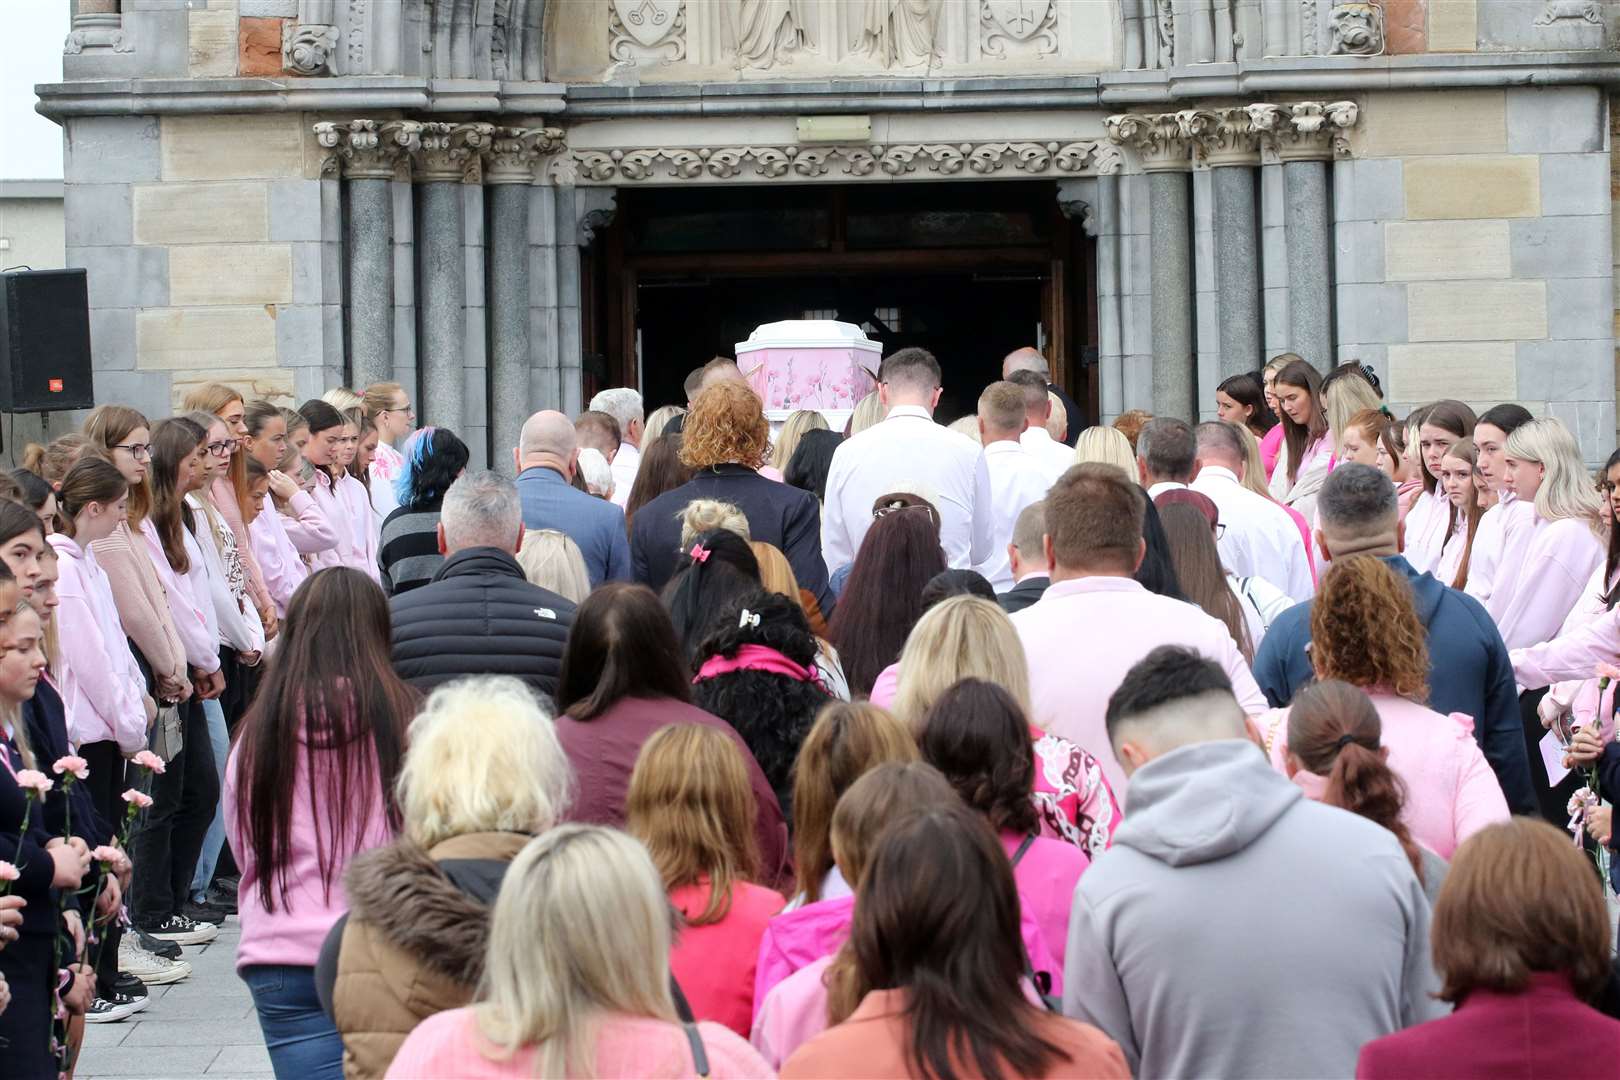 The coffin is carried into Saints Peter and Paul’s Church (Brendan Gleeson/PA)